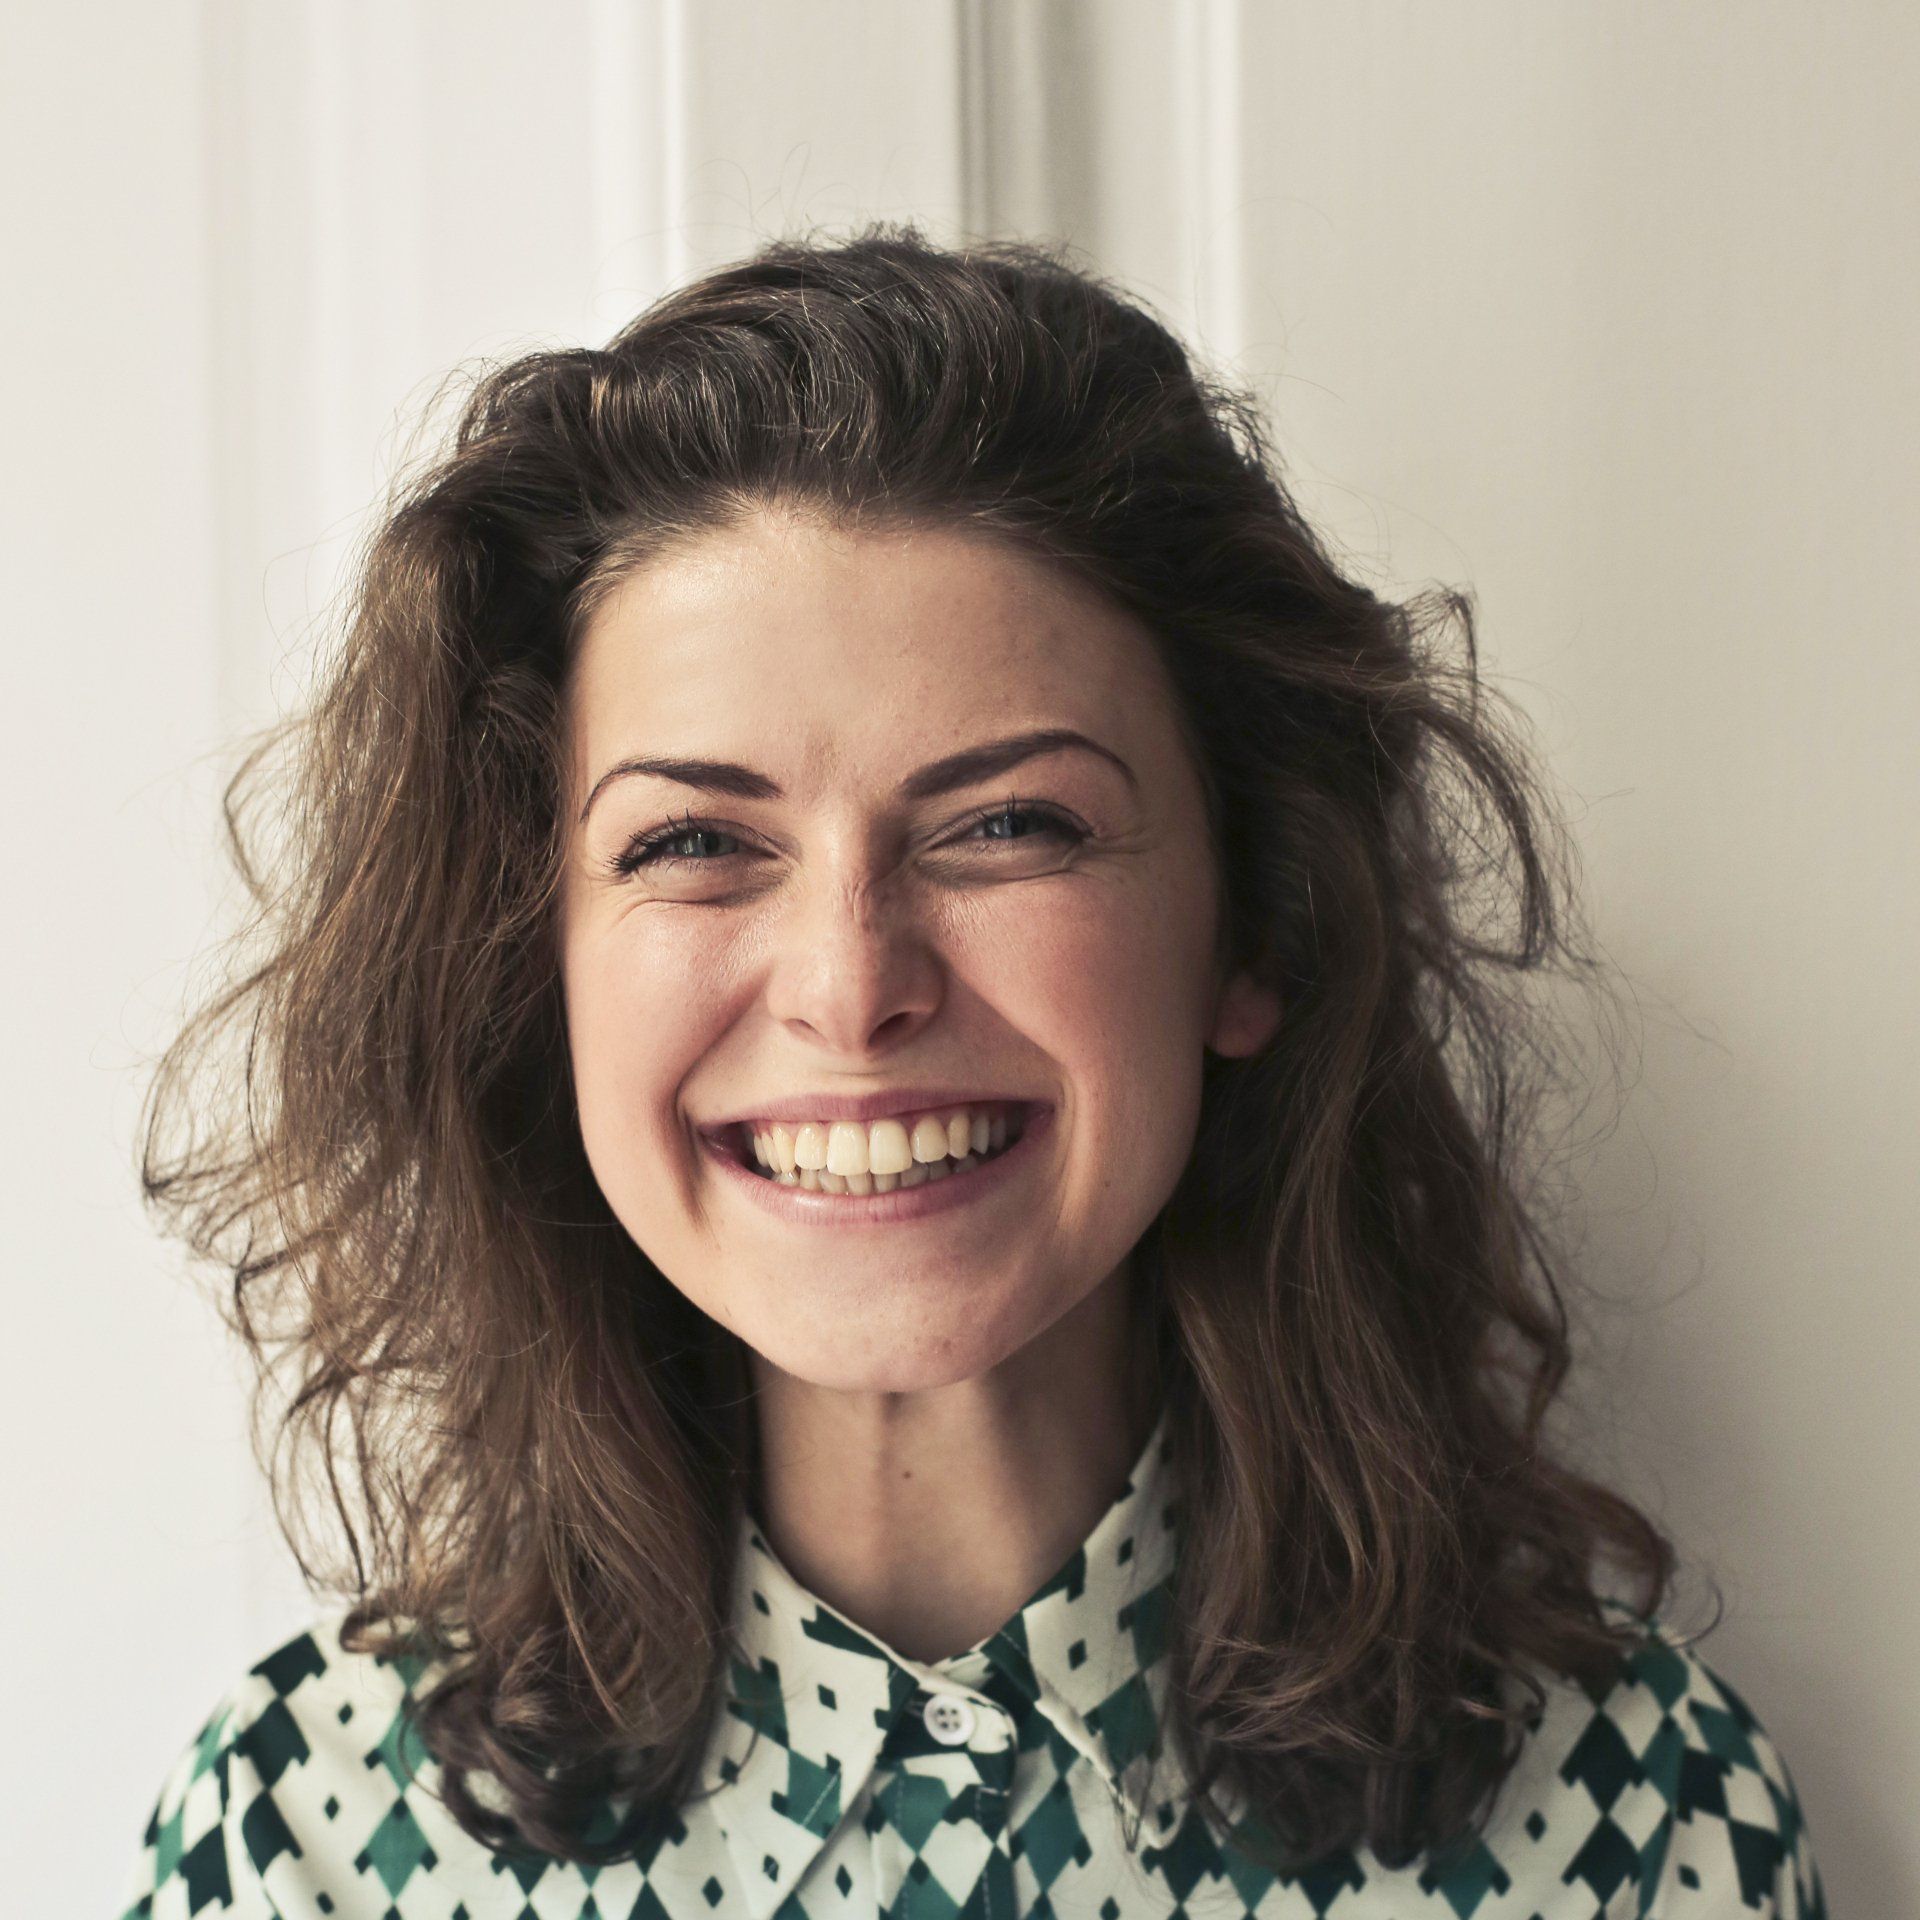 a woman wearing a green and white shirt is smiling